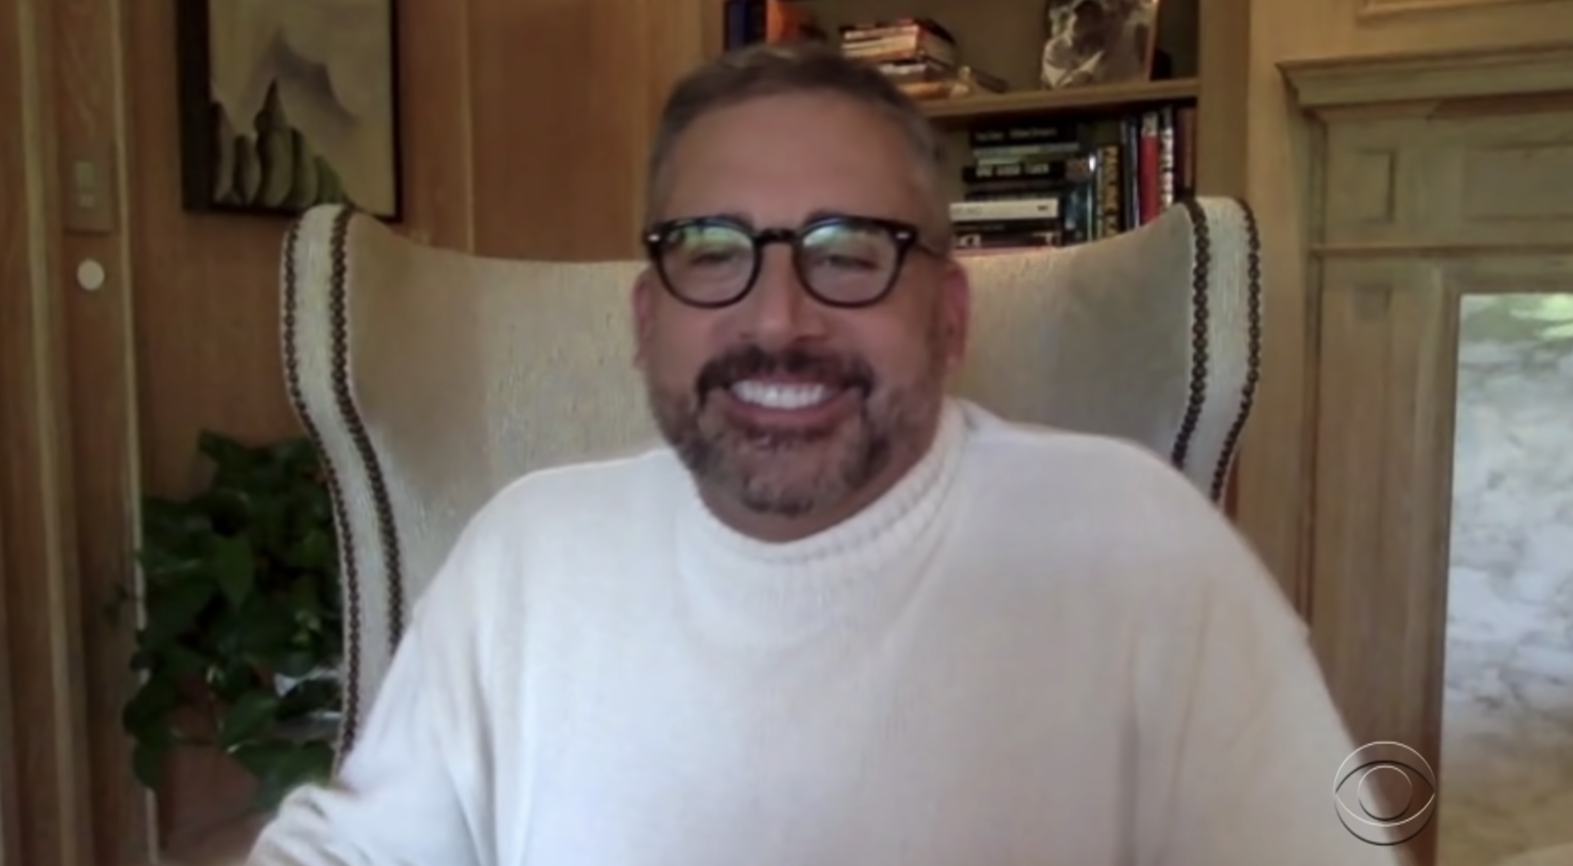 Steve Carell wearing glasses and a sweater at his home as a guest on &quot;Late Night with Stephen Colbert&quot;